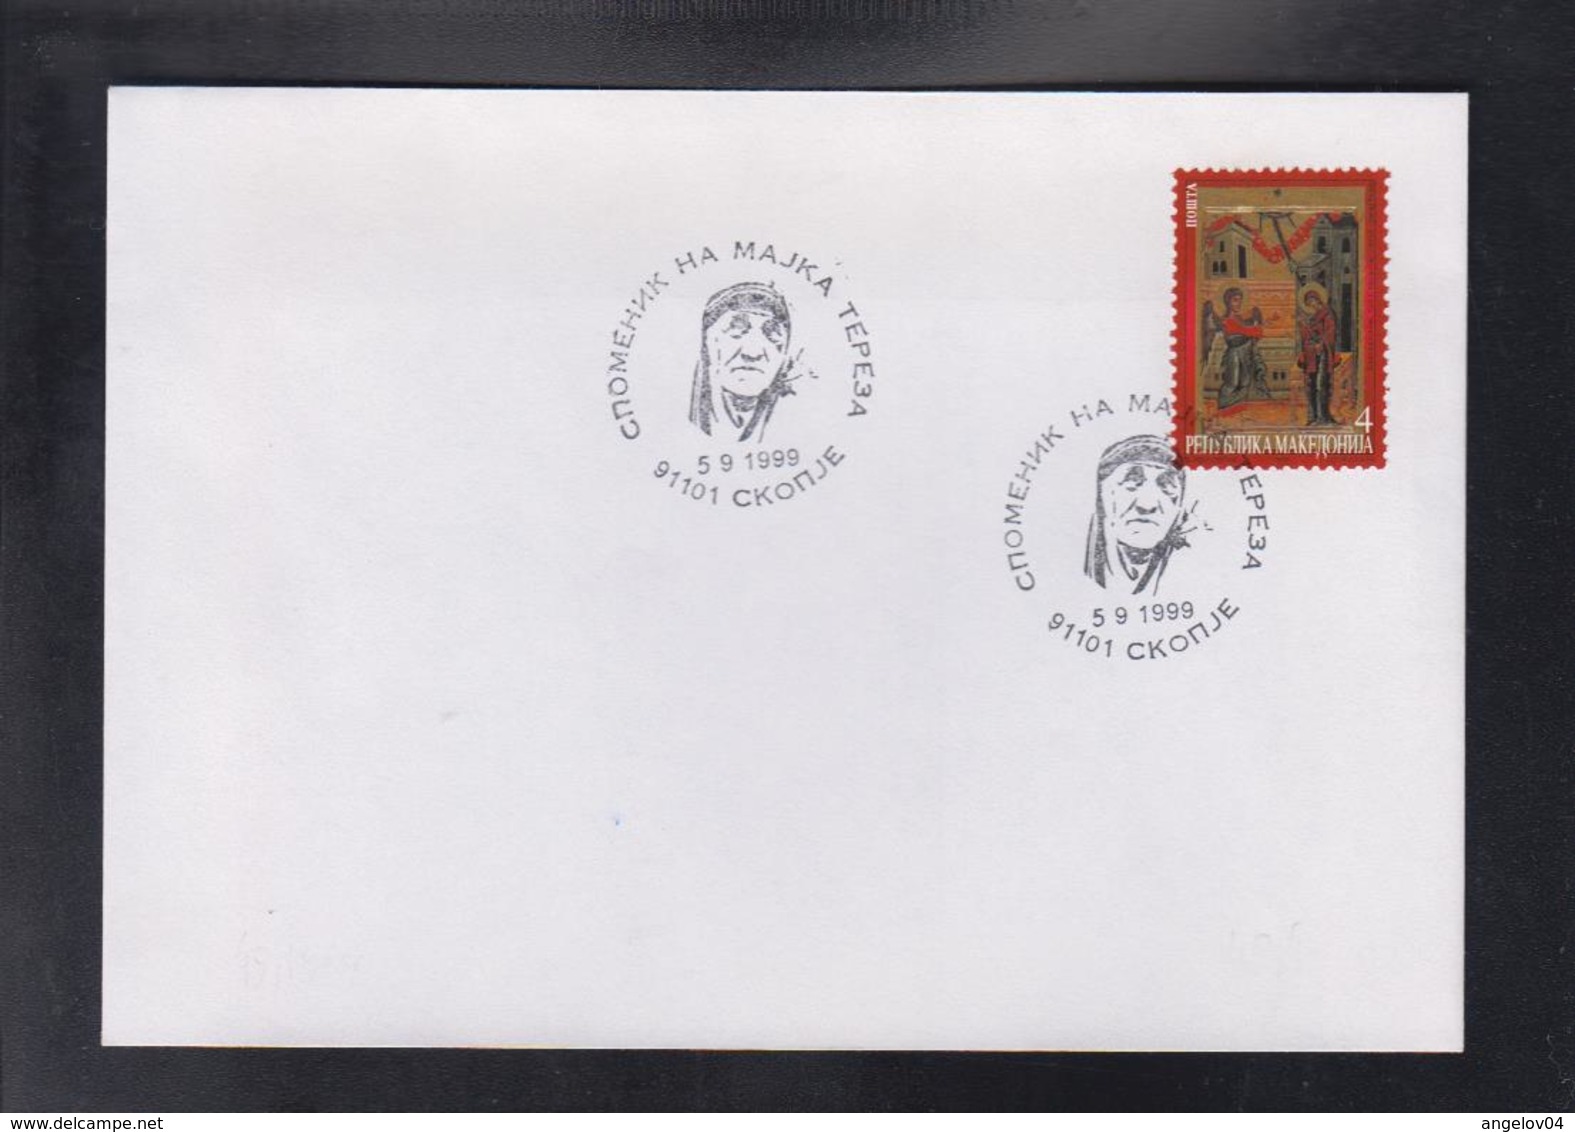 REPUBLIC OF MACEDONIA, 1999, SPECIAL CANCEL - MONUMENT OF MOTHER TERESA (1999/49) - Monumenti